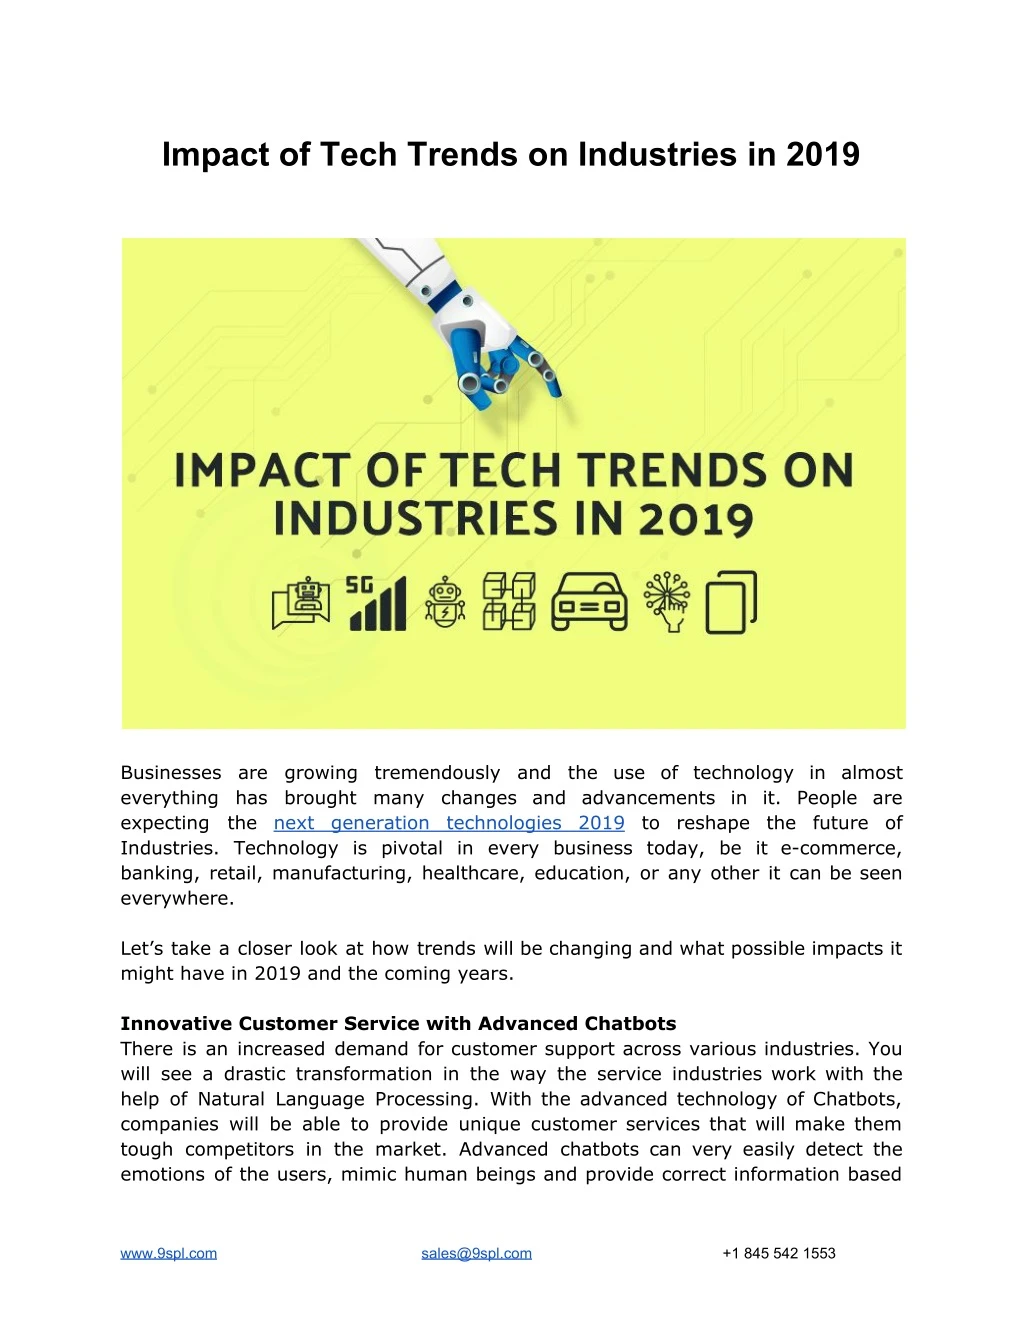 impact of tech trends on industries in 2019